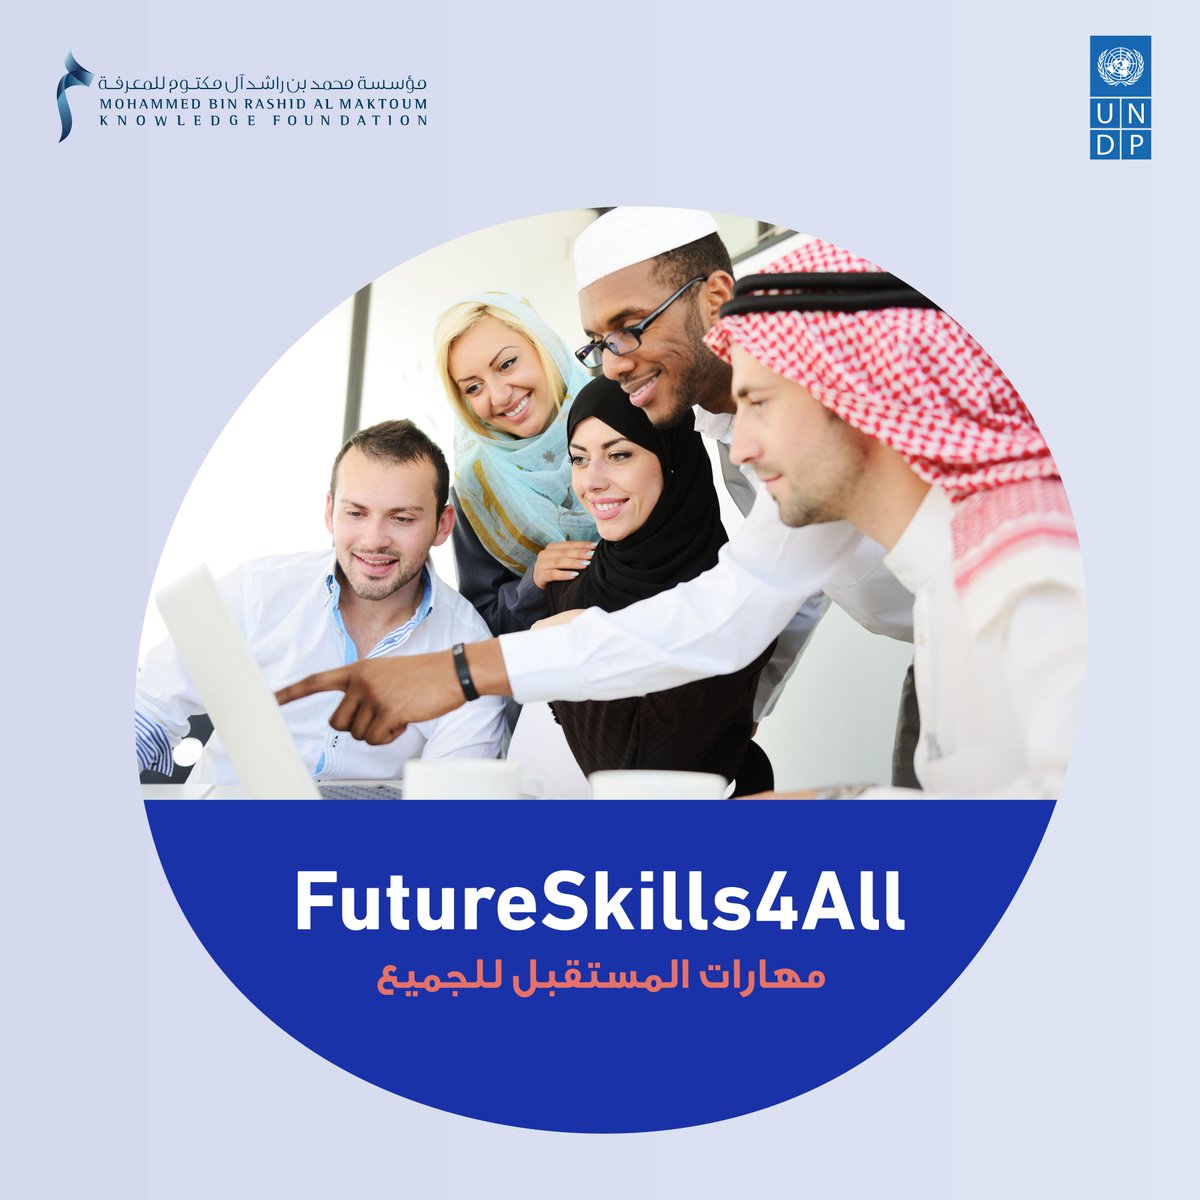 🇲🇦 @UNDP and @MBRF_Knowledge are expanding their efforts in #Morocco, teaming up with @MIEPEECMAROC led by H.E. @younessekkouri. 🌟 Our goal? To integrate Moroccan citizens and job seekers into the #FutureSkills4All initiative. 👉 For more details and to join, visit:…